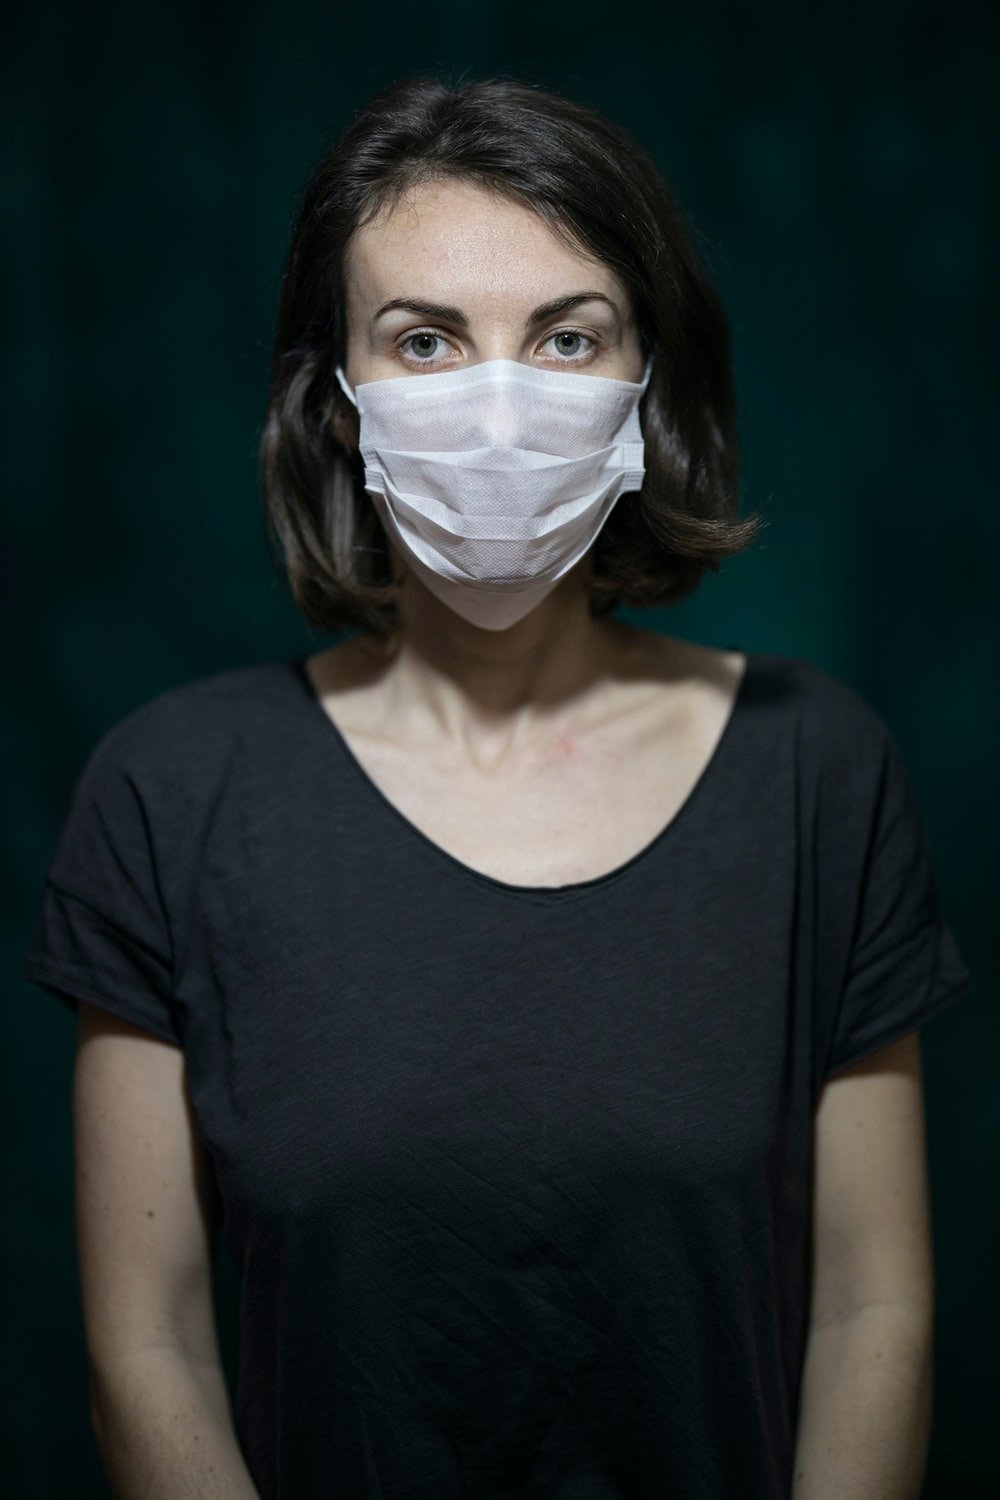 Face Mask Picture [HD]. Download Free Image